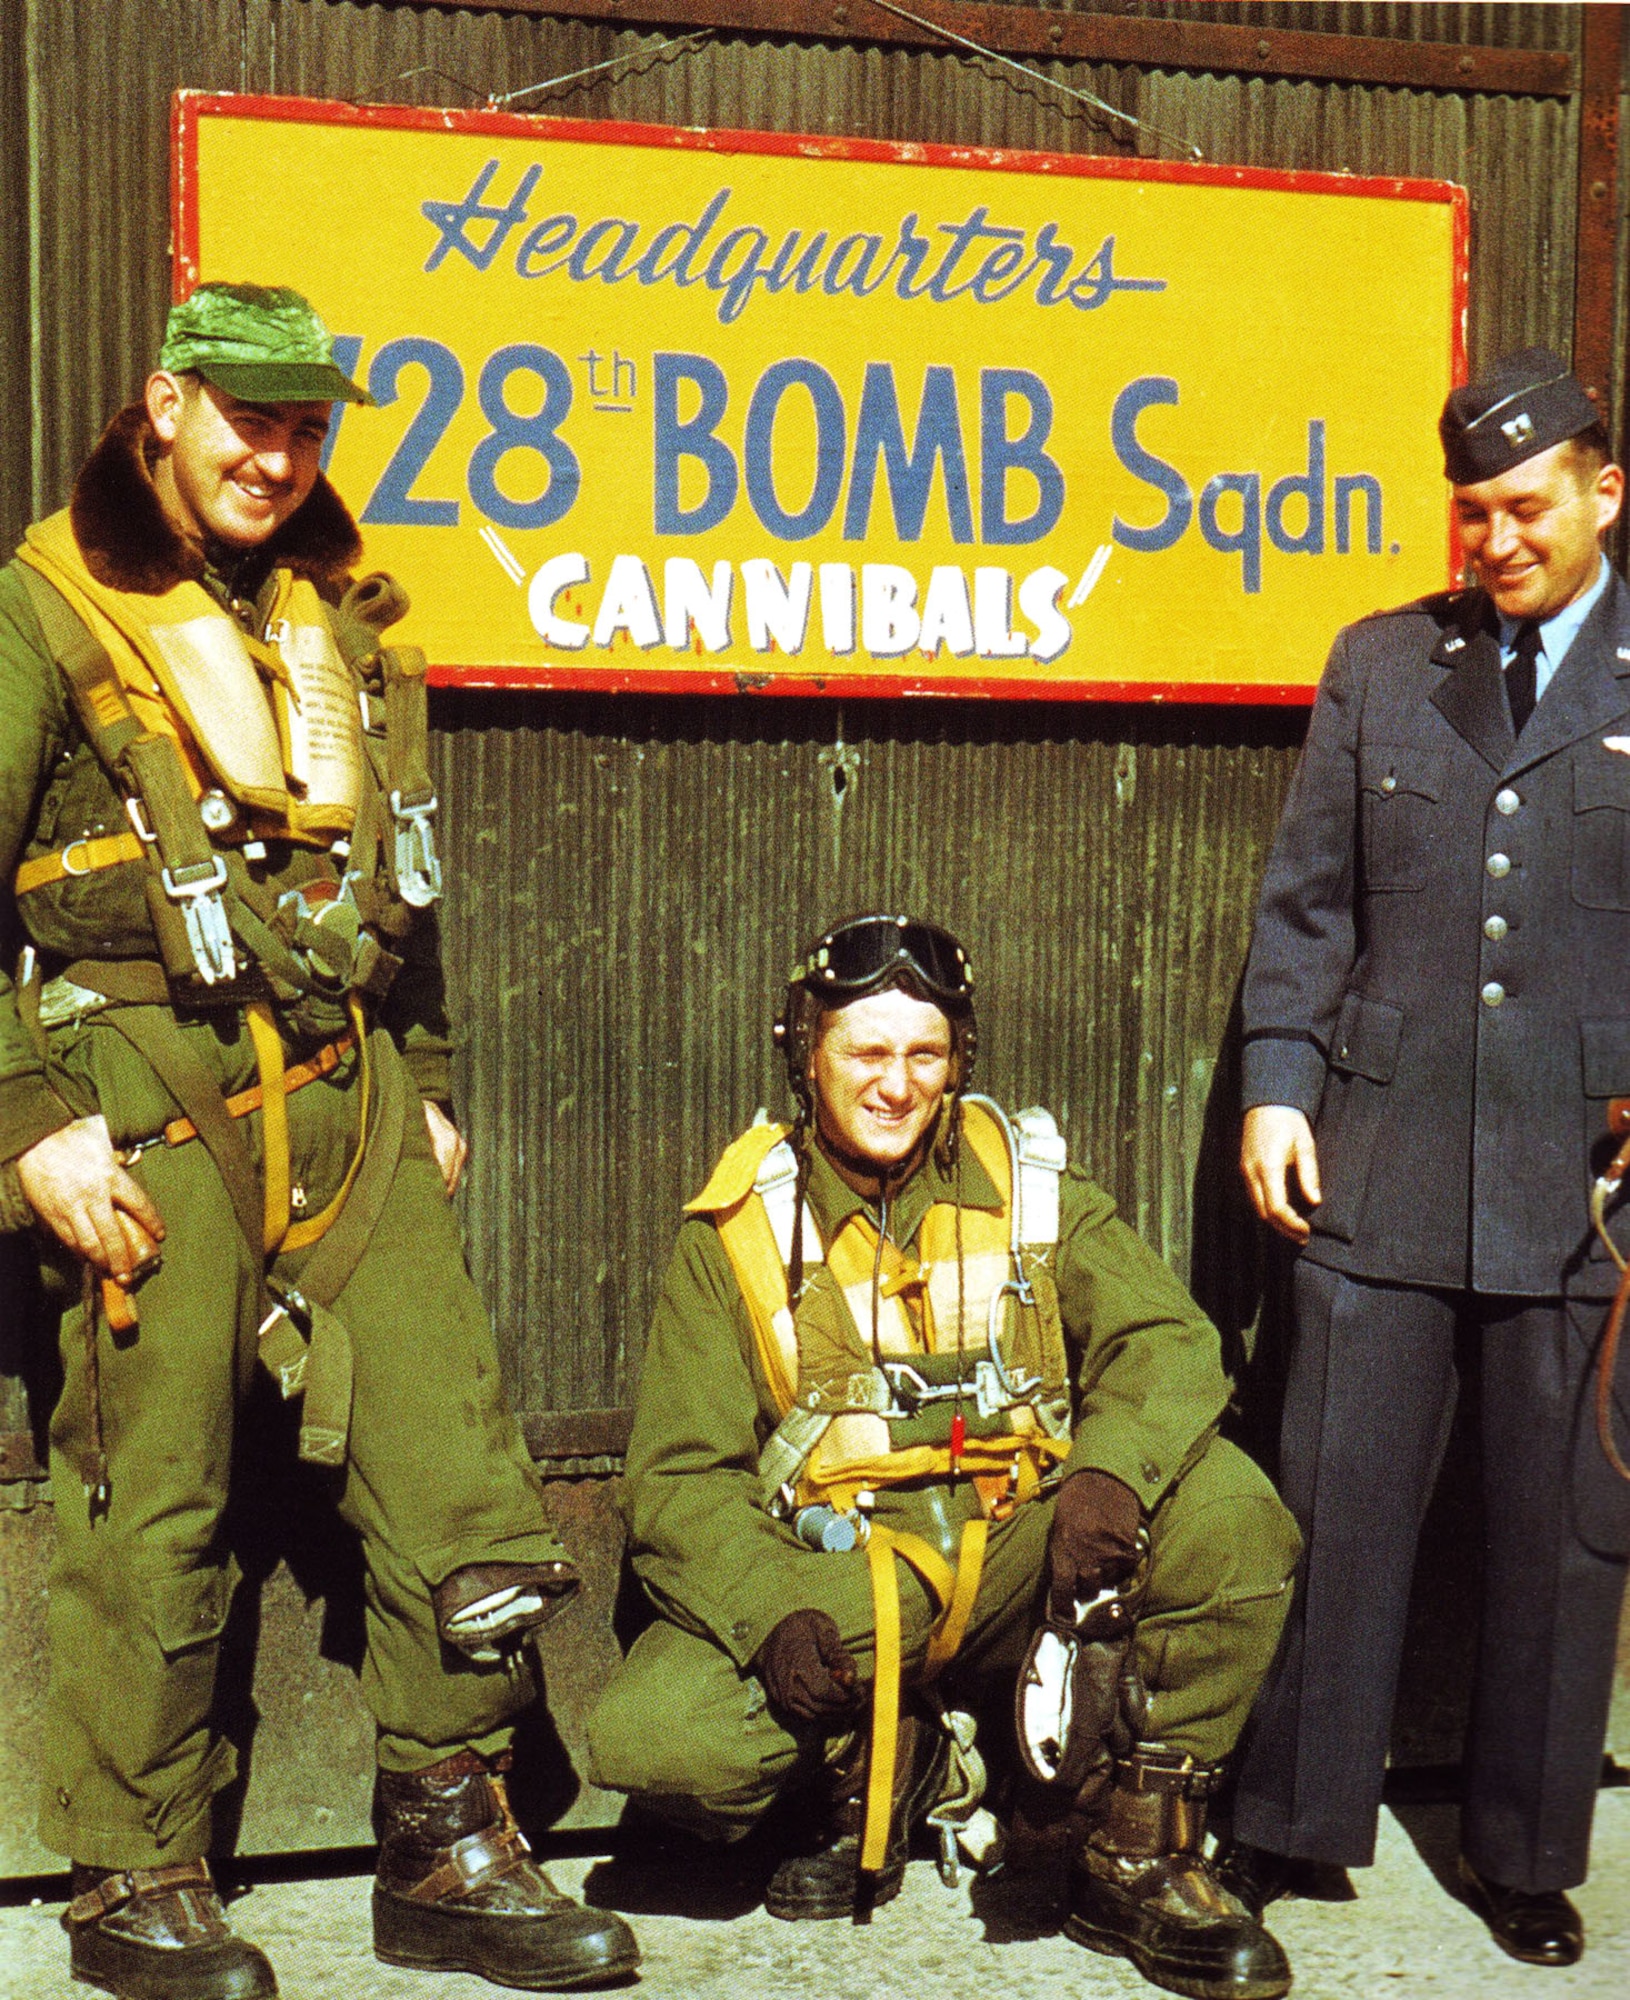 Air Force Reserve members of the 728th Bomb Squadron, 452nd Bomb Group. The group was ordered to active duty for combat in Korea in August 1950. (U.S. Air Force photo)